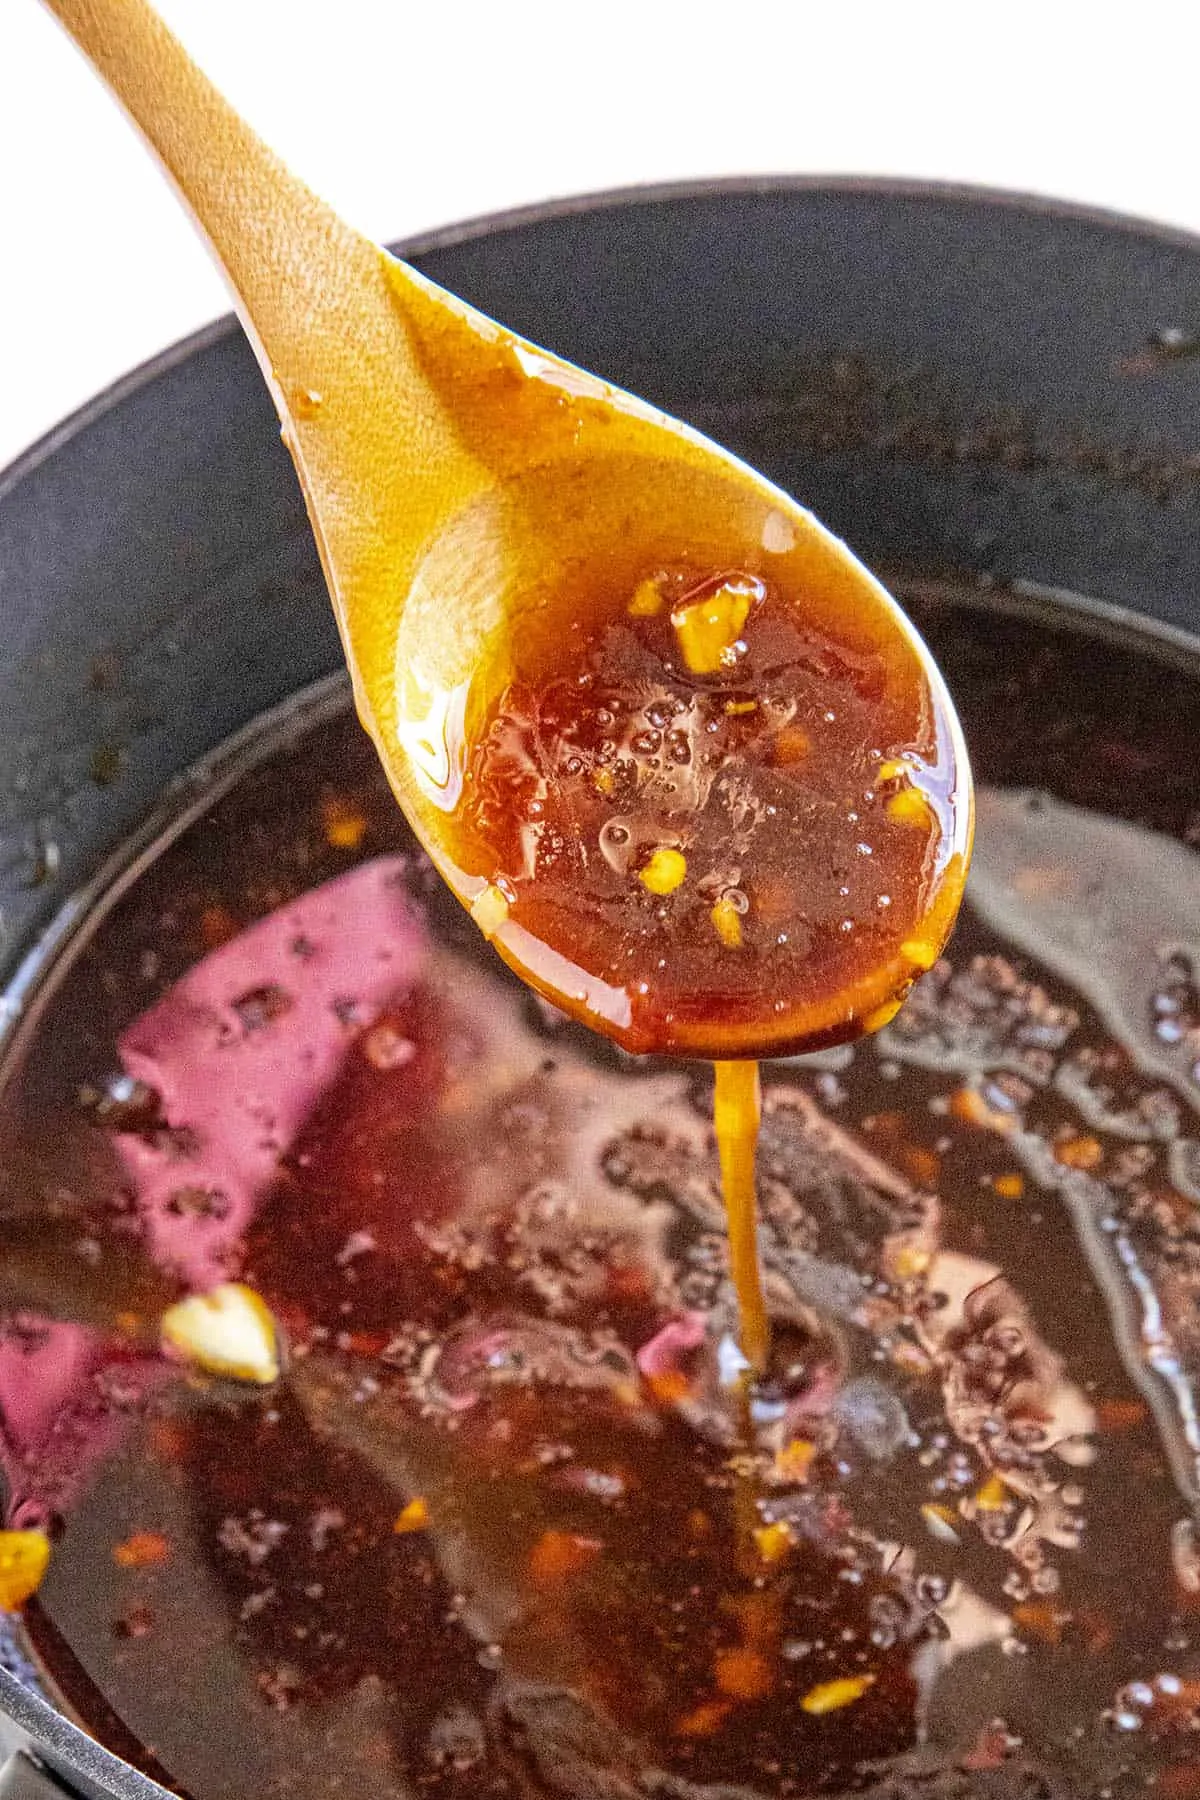 Sweet and spicy Teriyaki Sauce dripping from a spoon